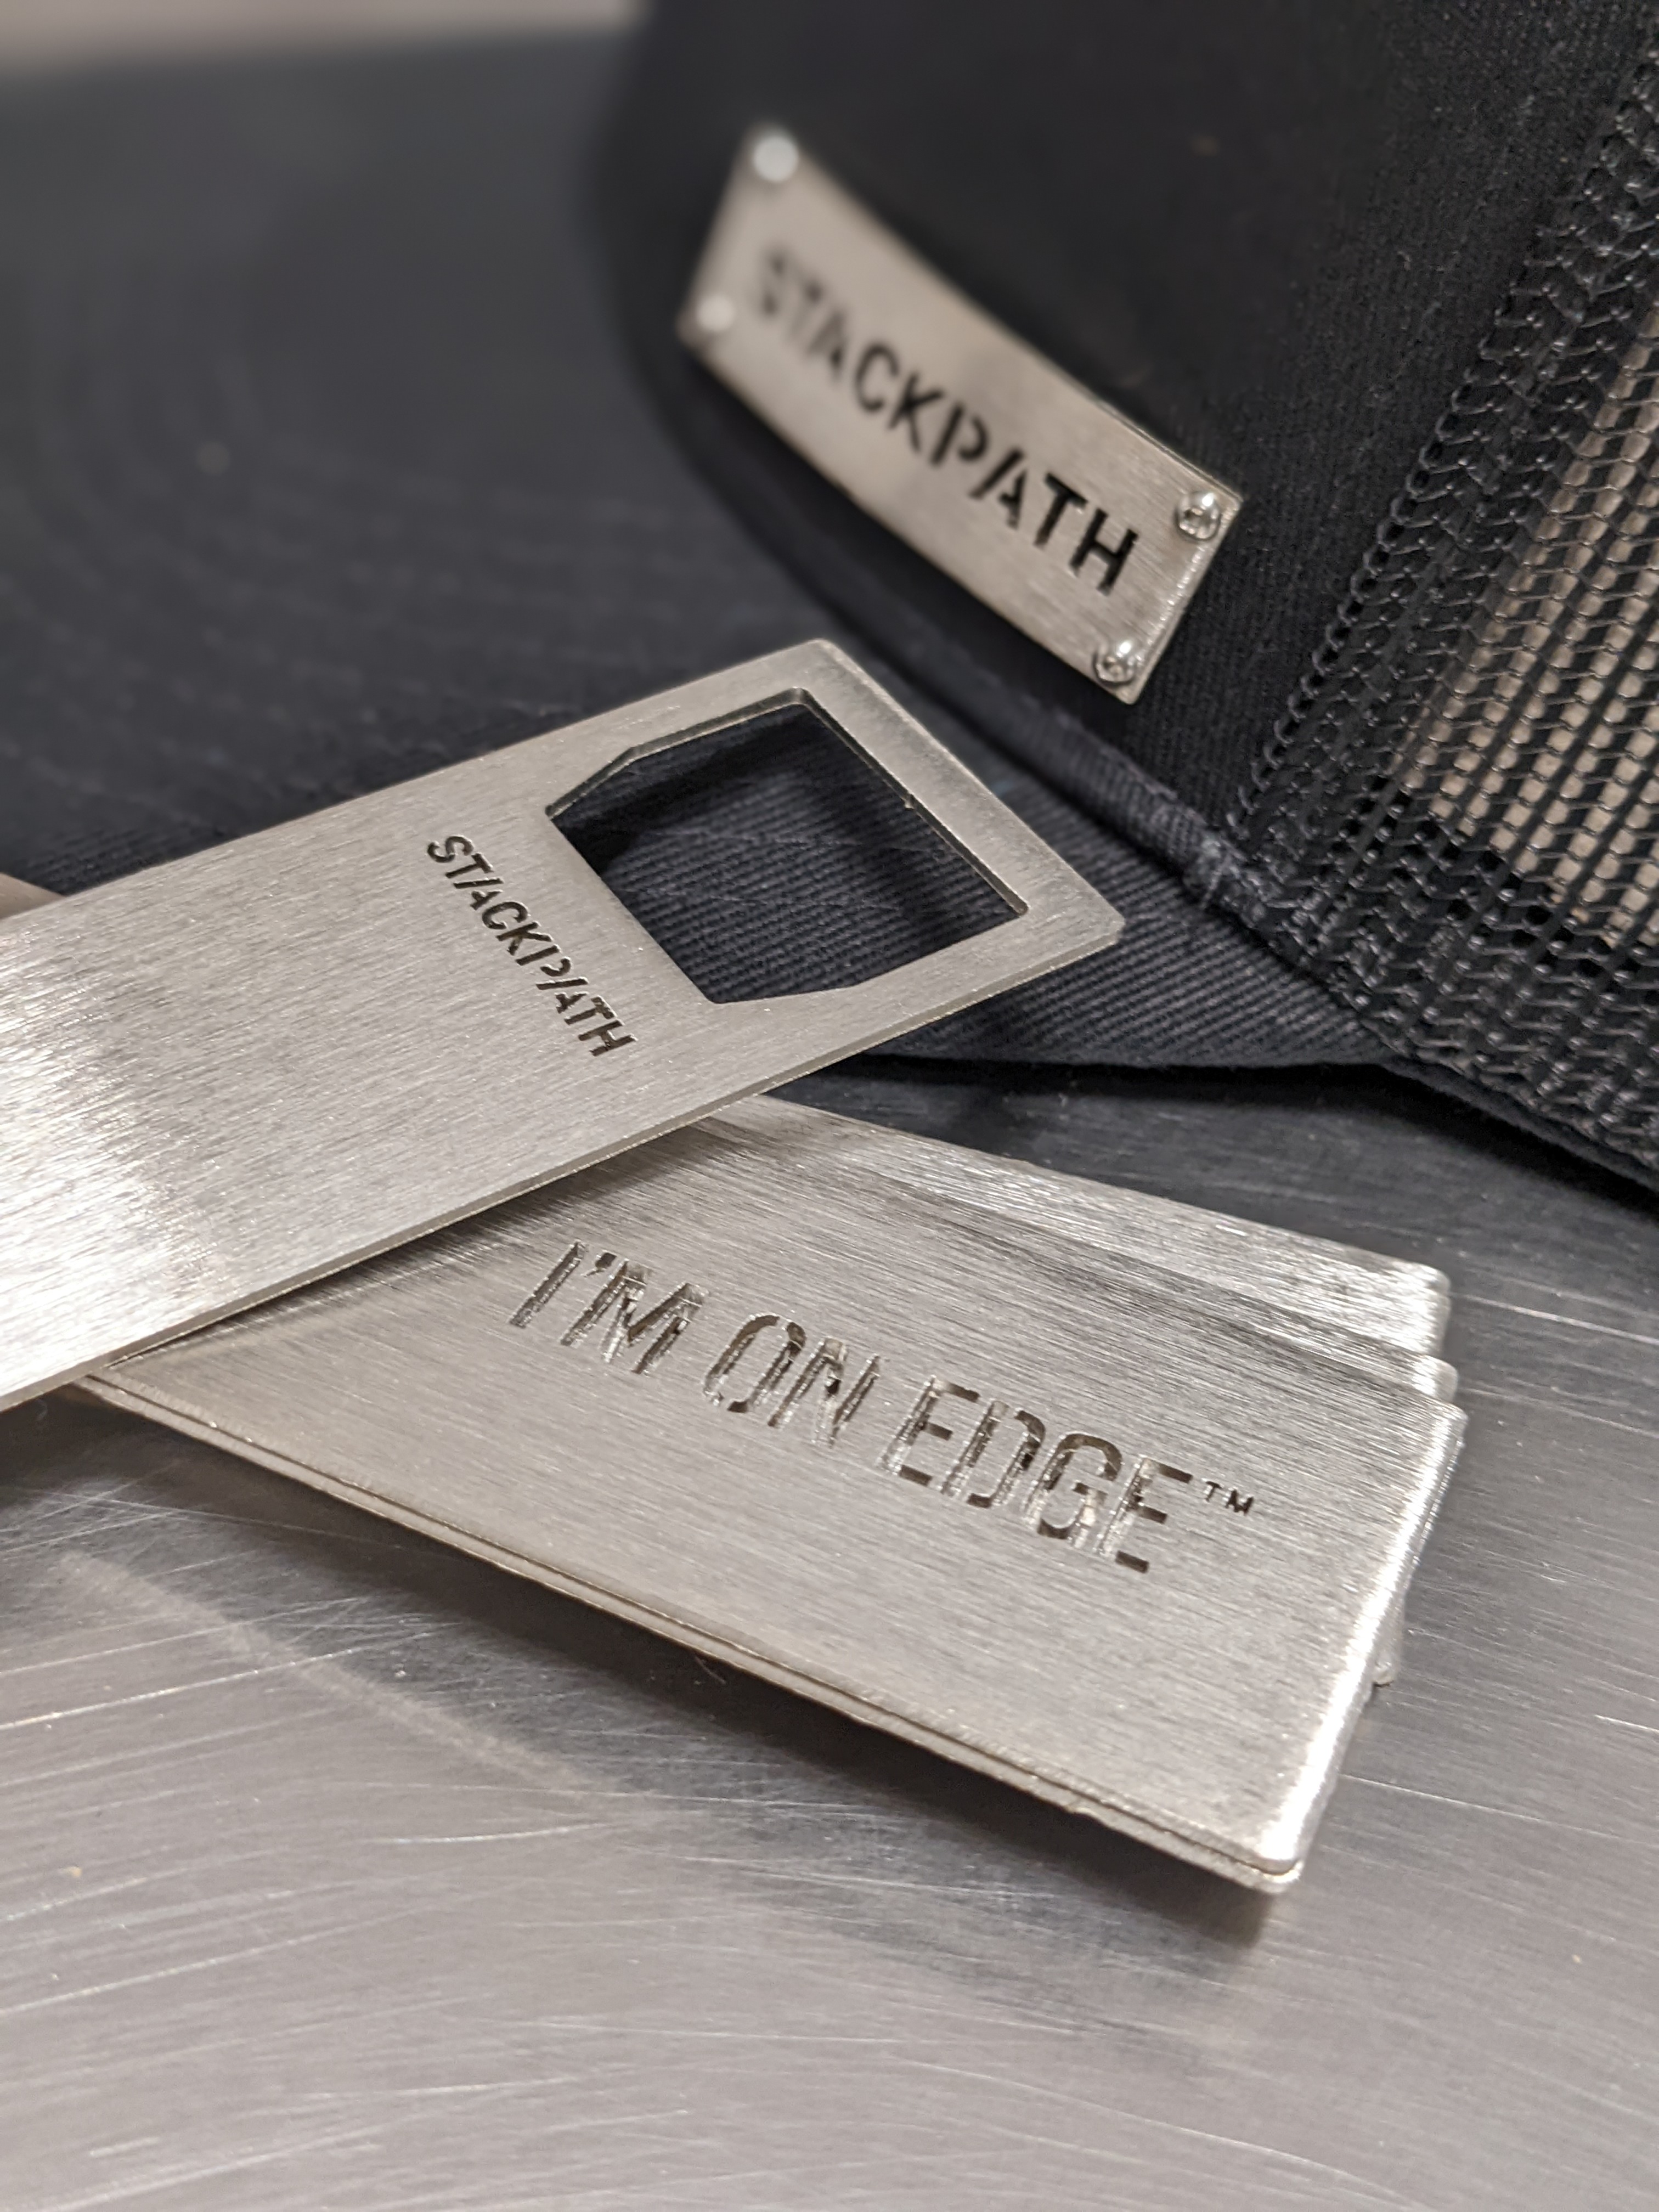 Photo of StackPath custom stainless steel bottle openers and metal badgecaps with logo laser cut